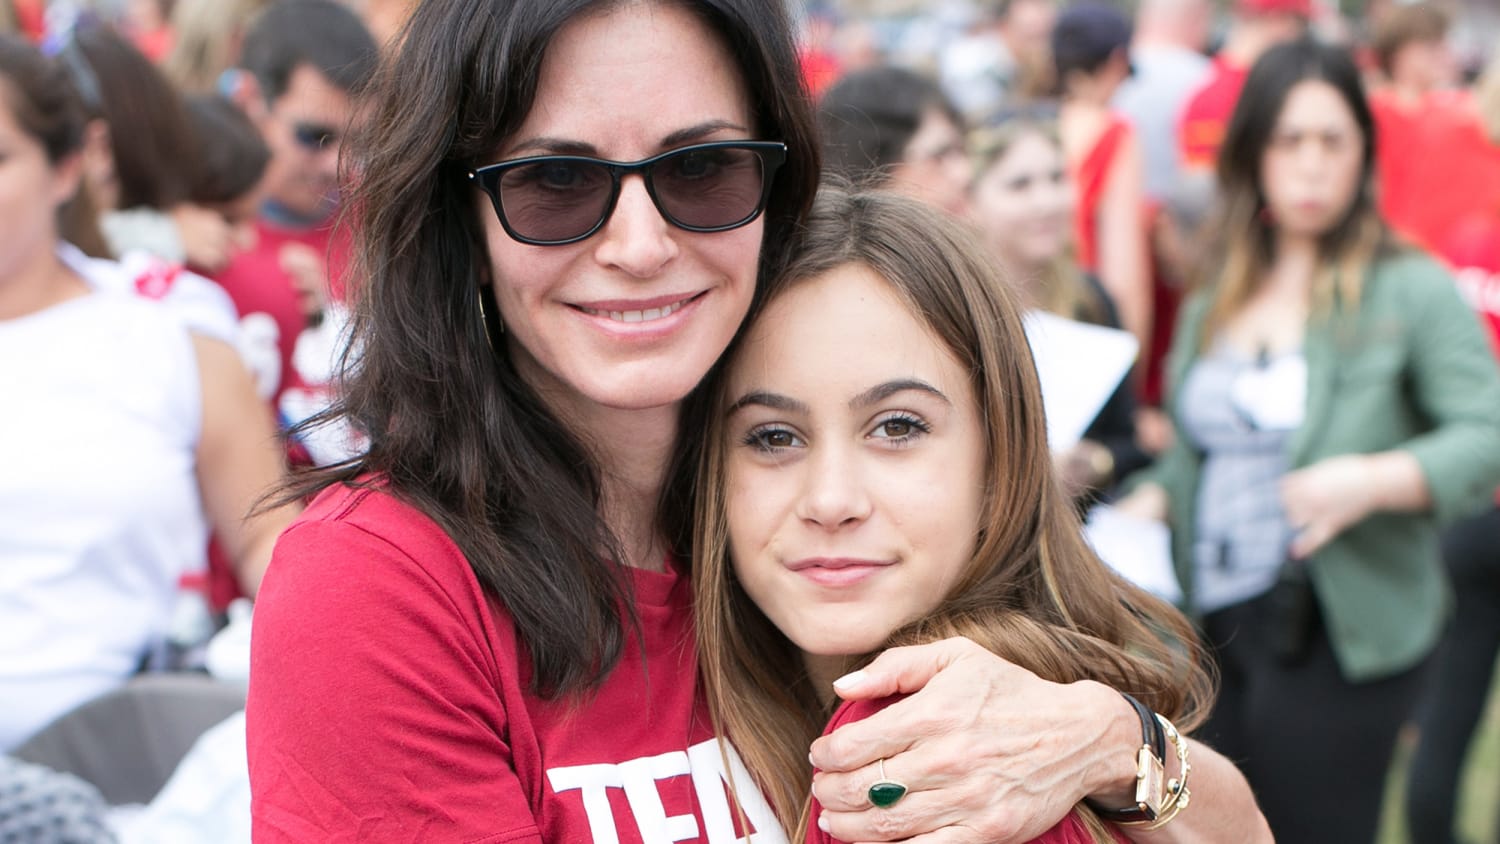 Courteney Cox on having face injections dissolved: 'I'm as natural as I can be'